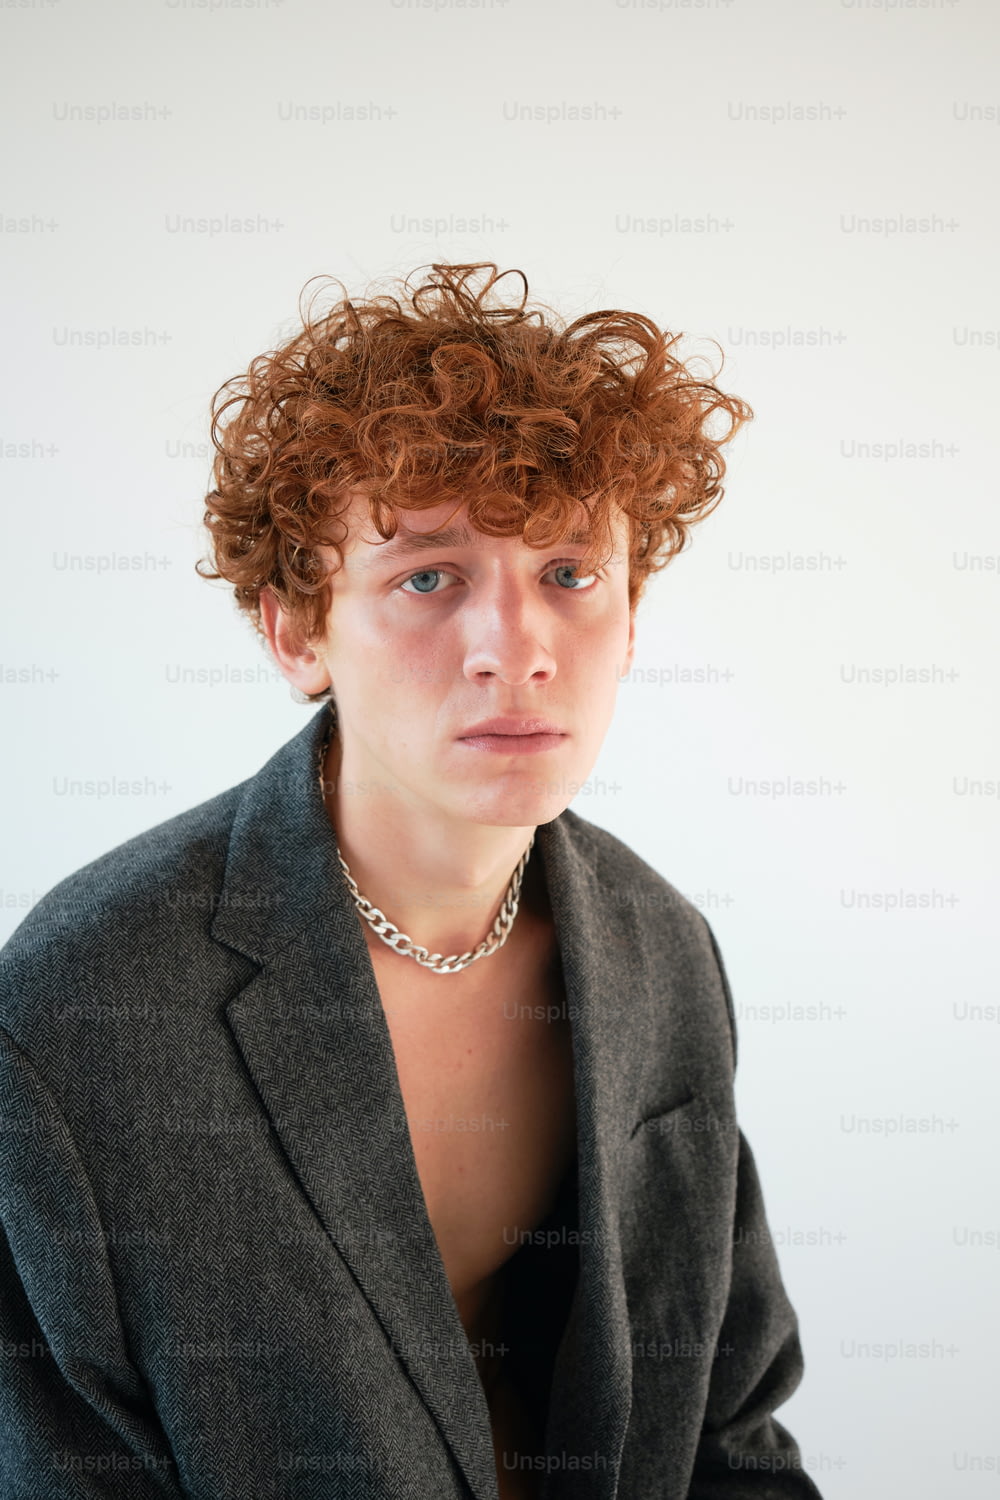 a woman with curly red hair wearing a suit